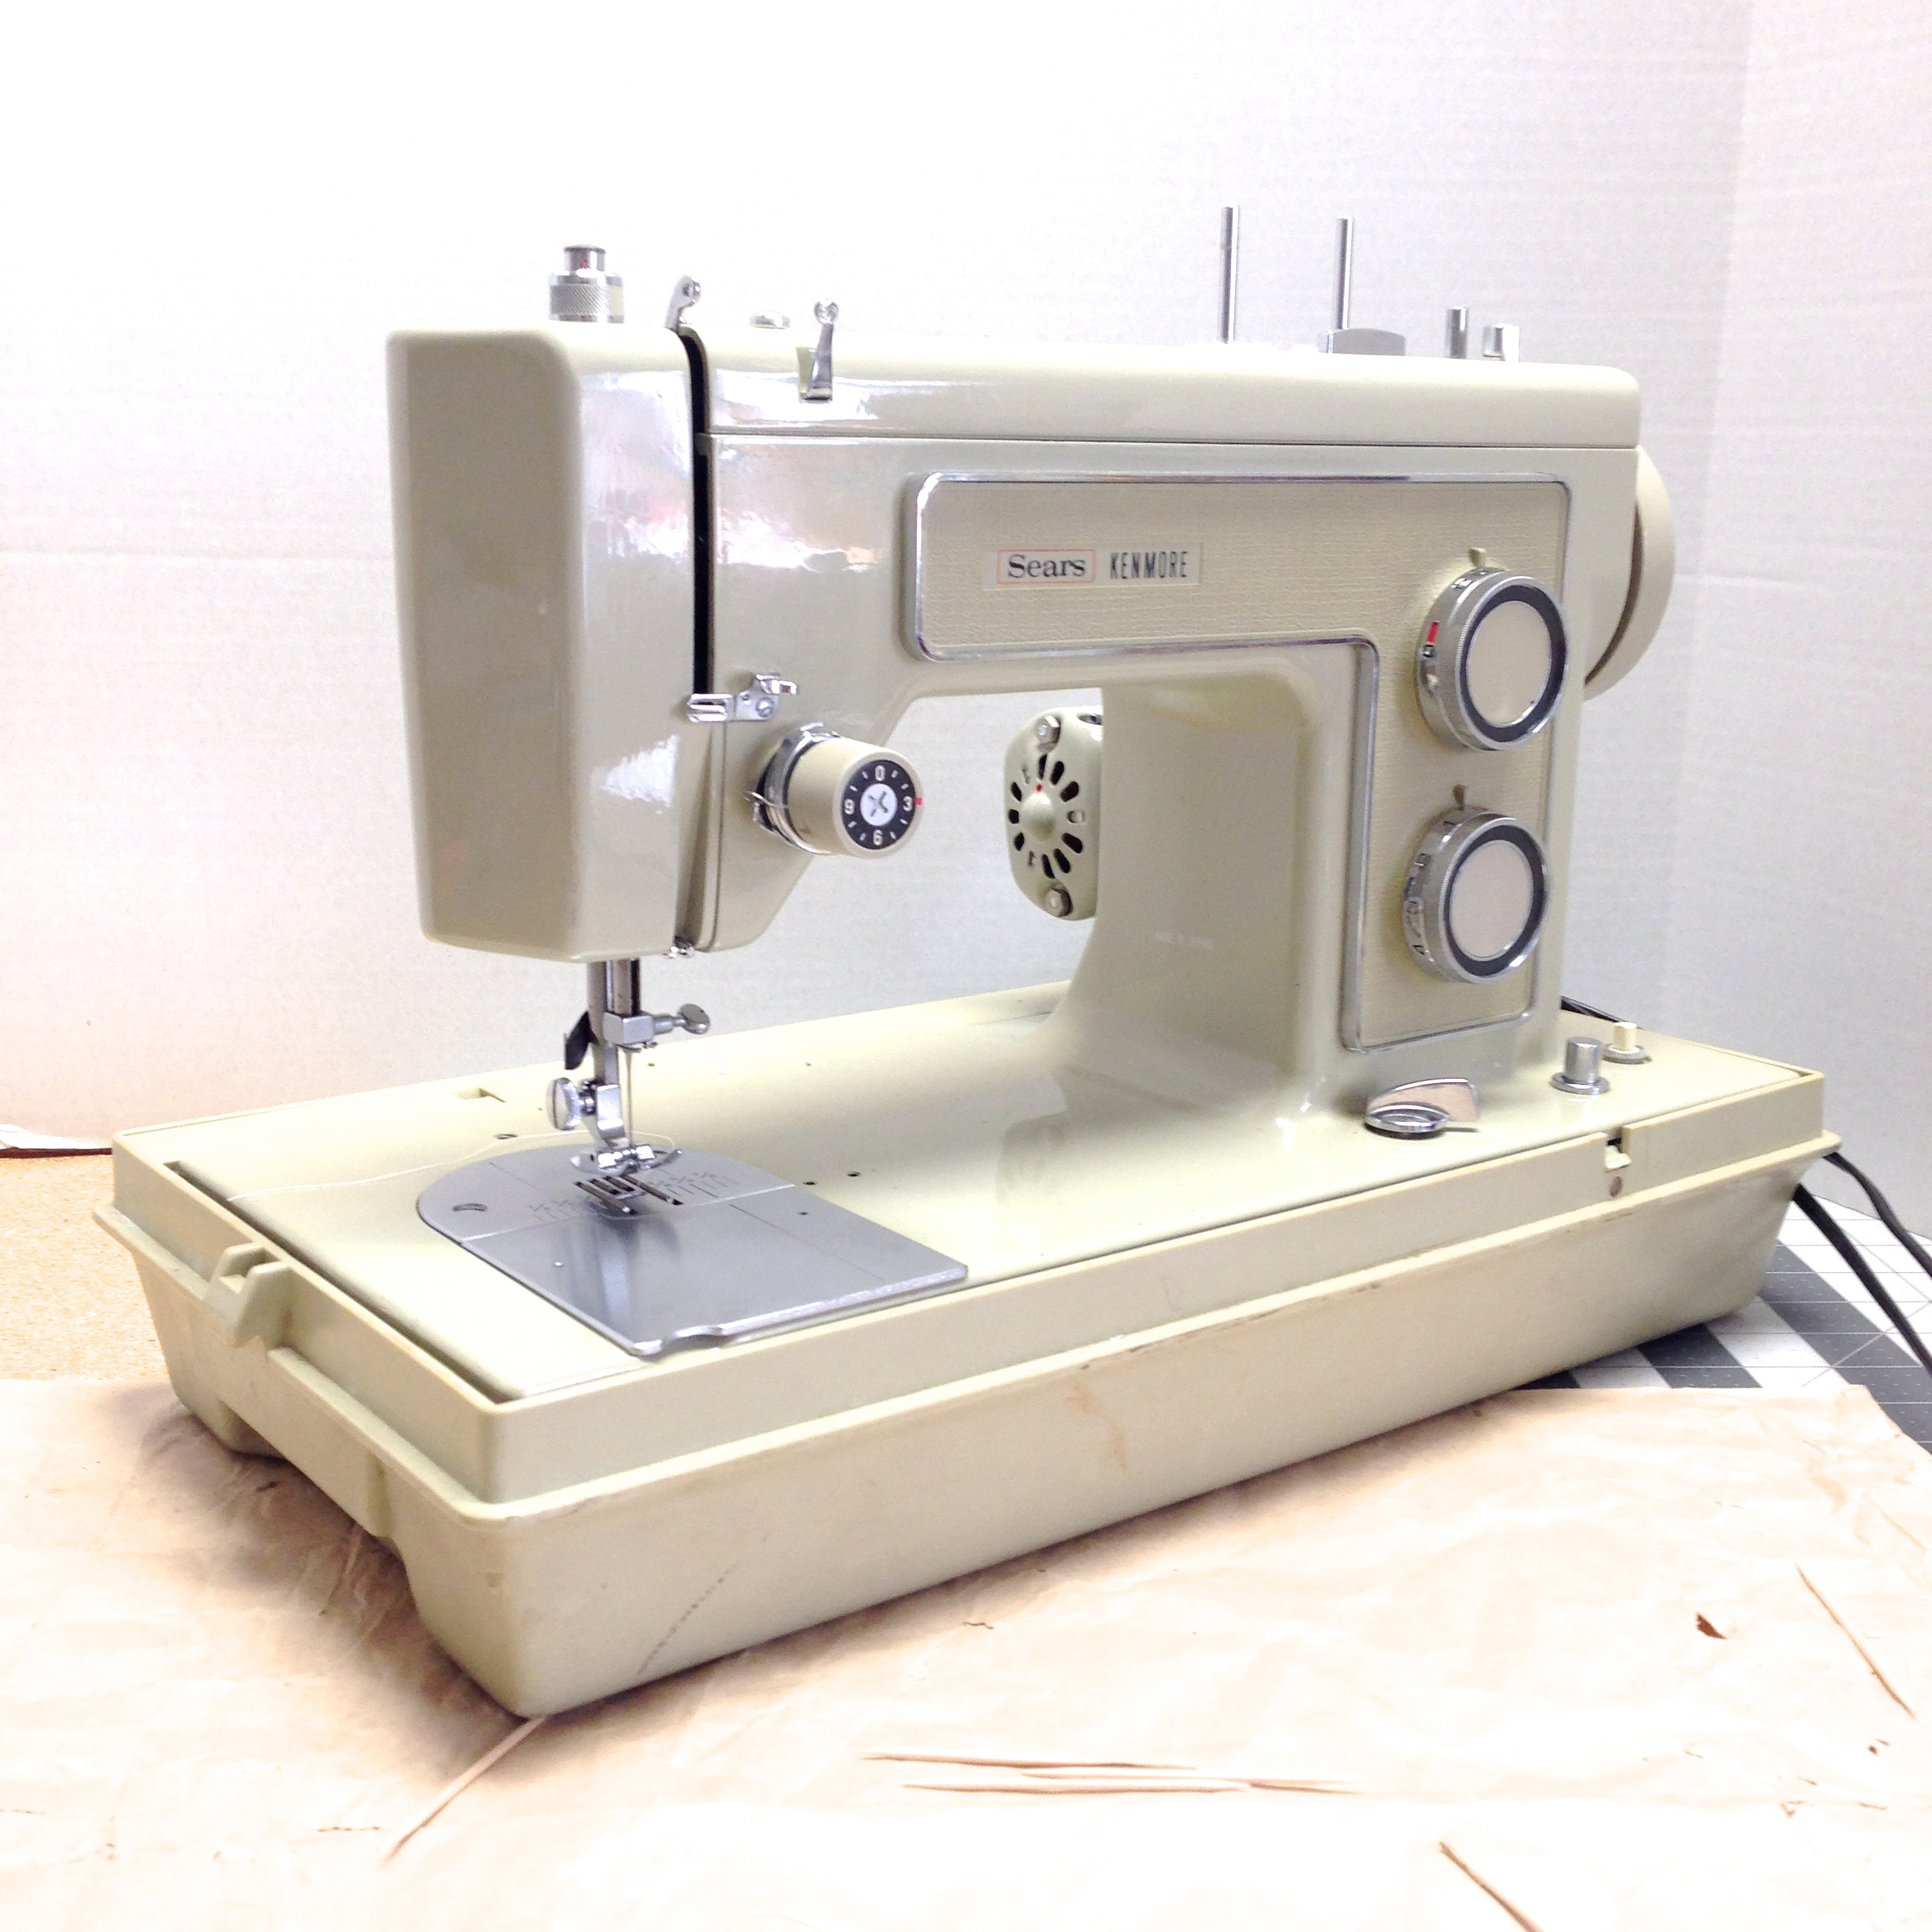 Sears Kenmore 148.15600 (Model 1560) Sewing Machine – A Review